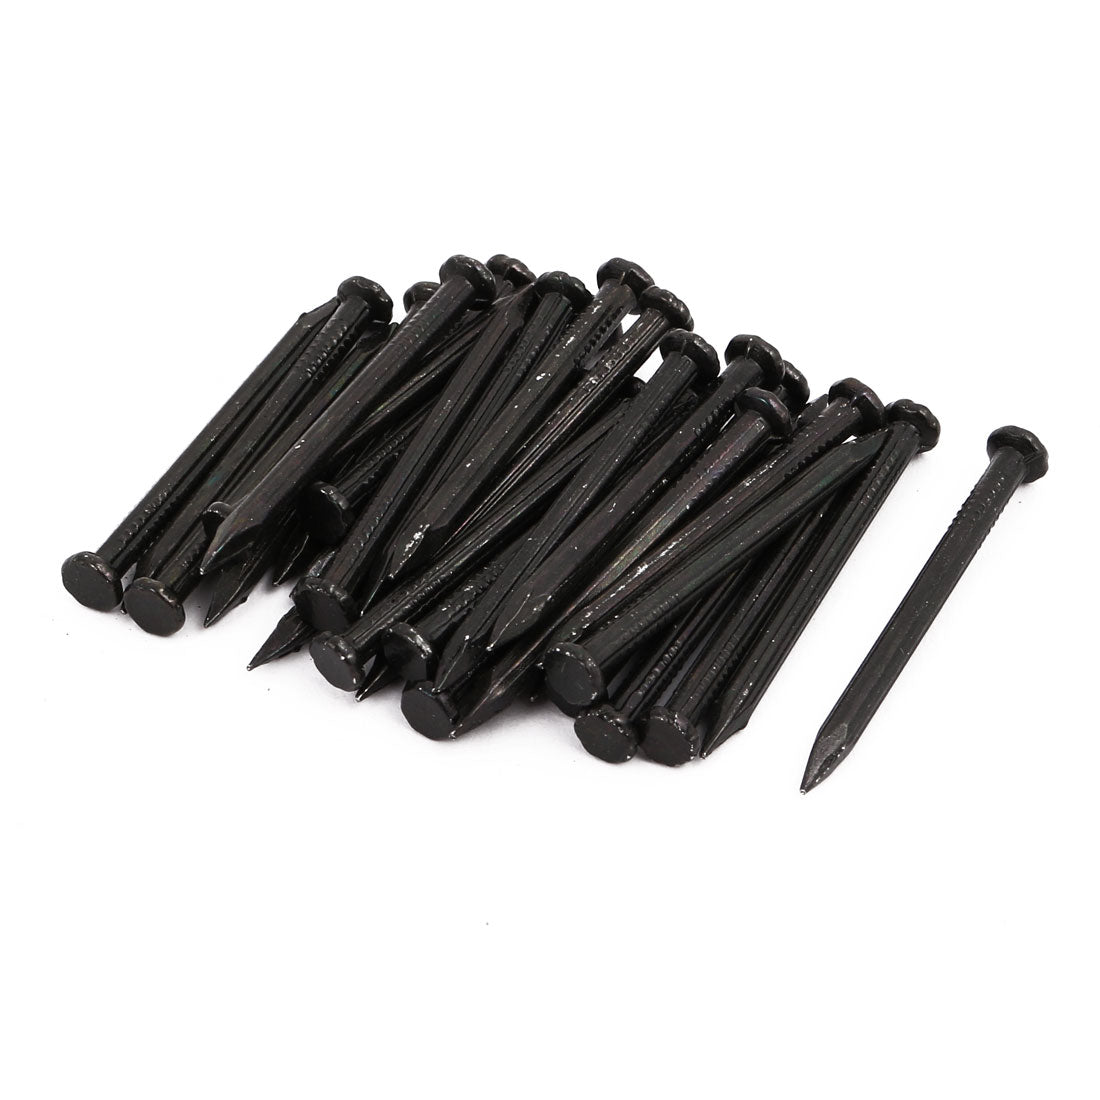 uxcell Uxcell 3mm x 40mm Fiber Concrete Cement Wall Point Tip Nails Black 30pcs